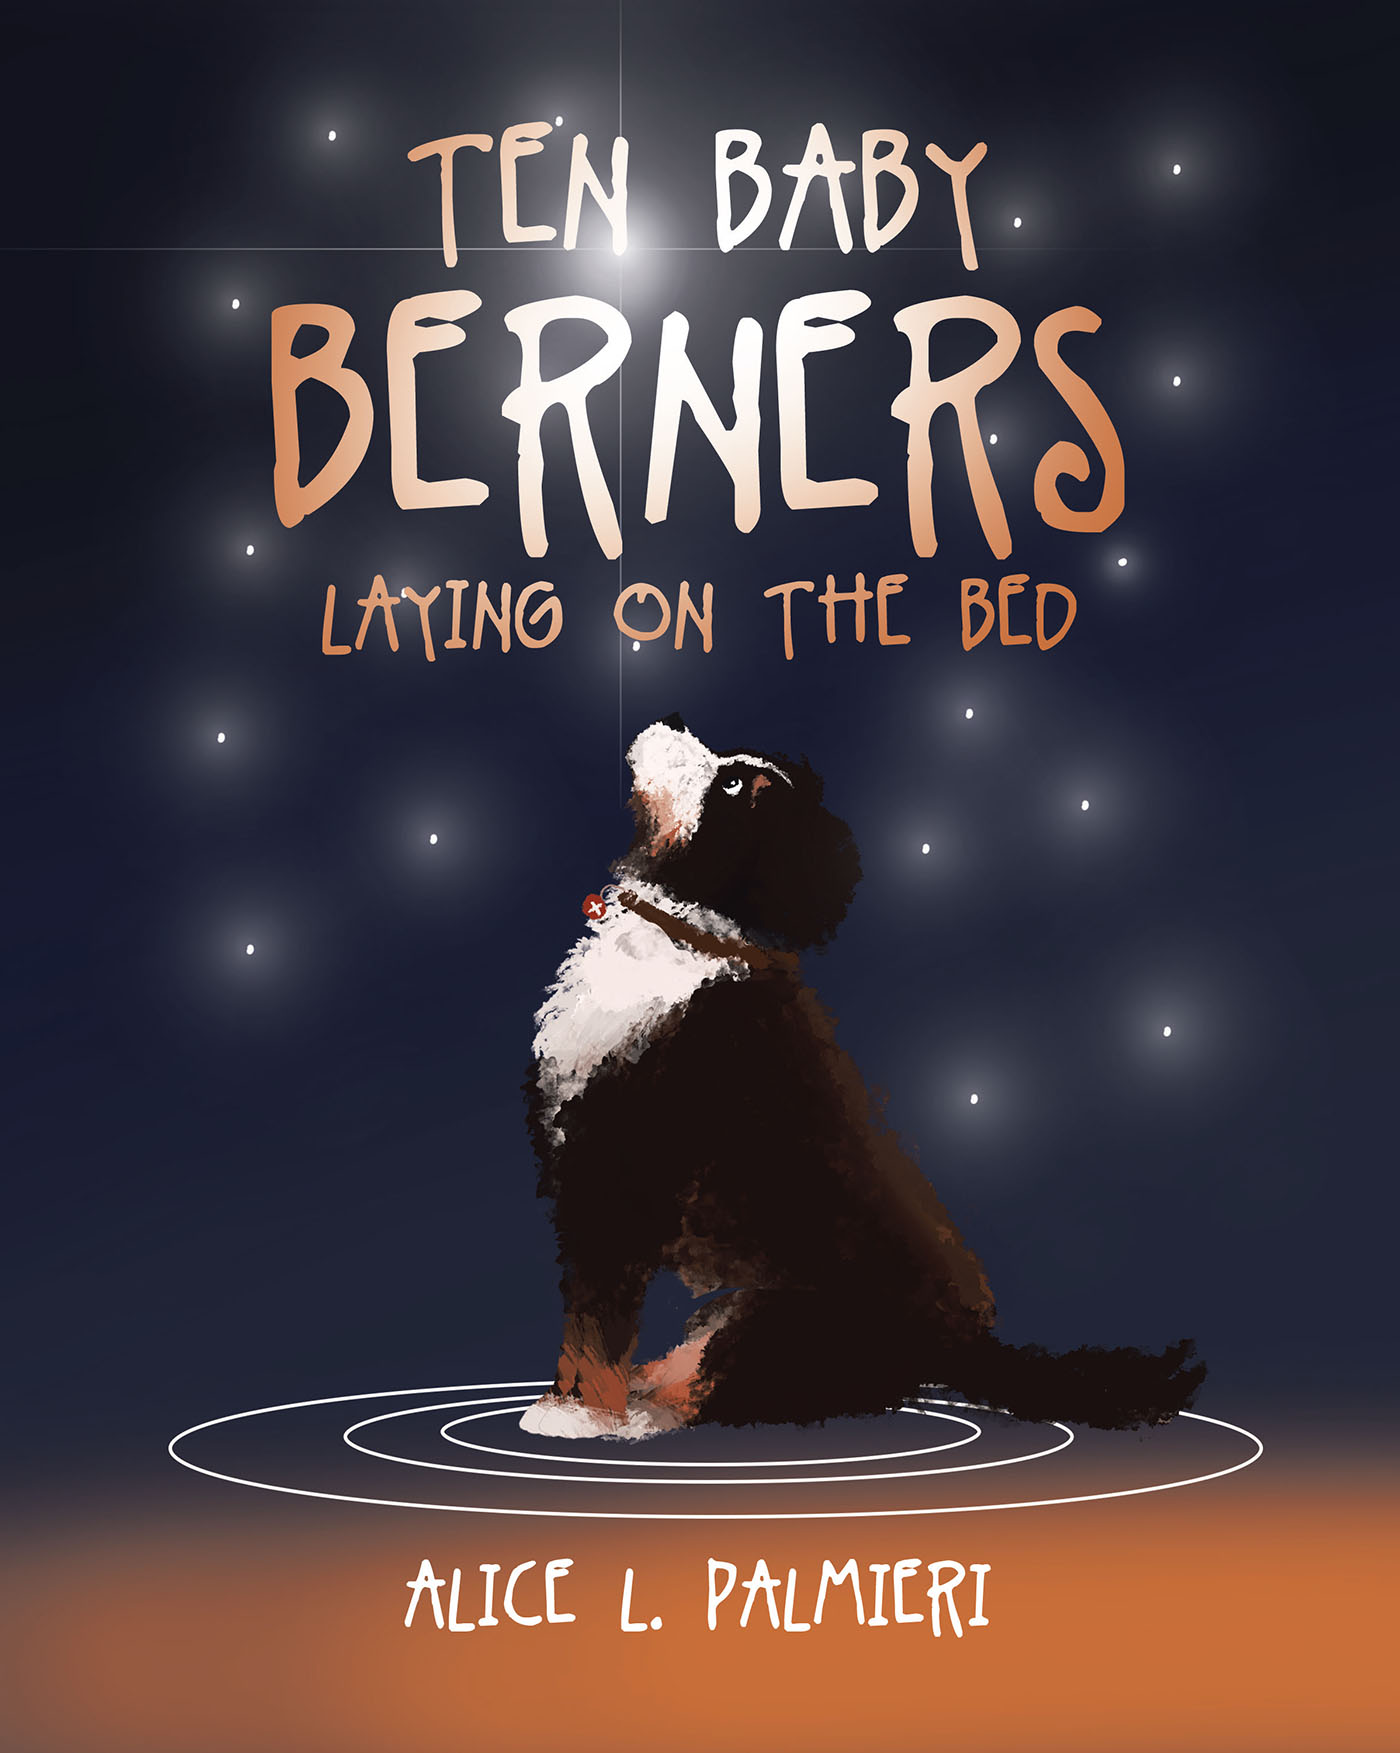 Ten Baby Berners Laying on the Bed Cover Image